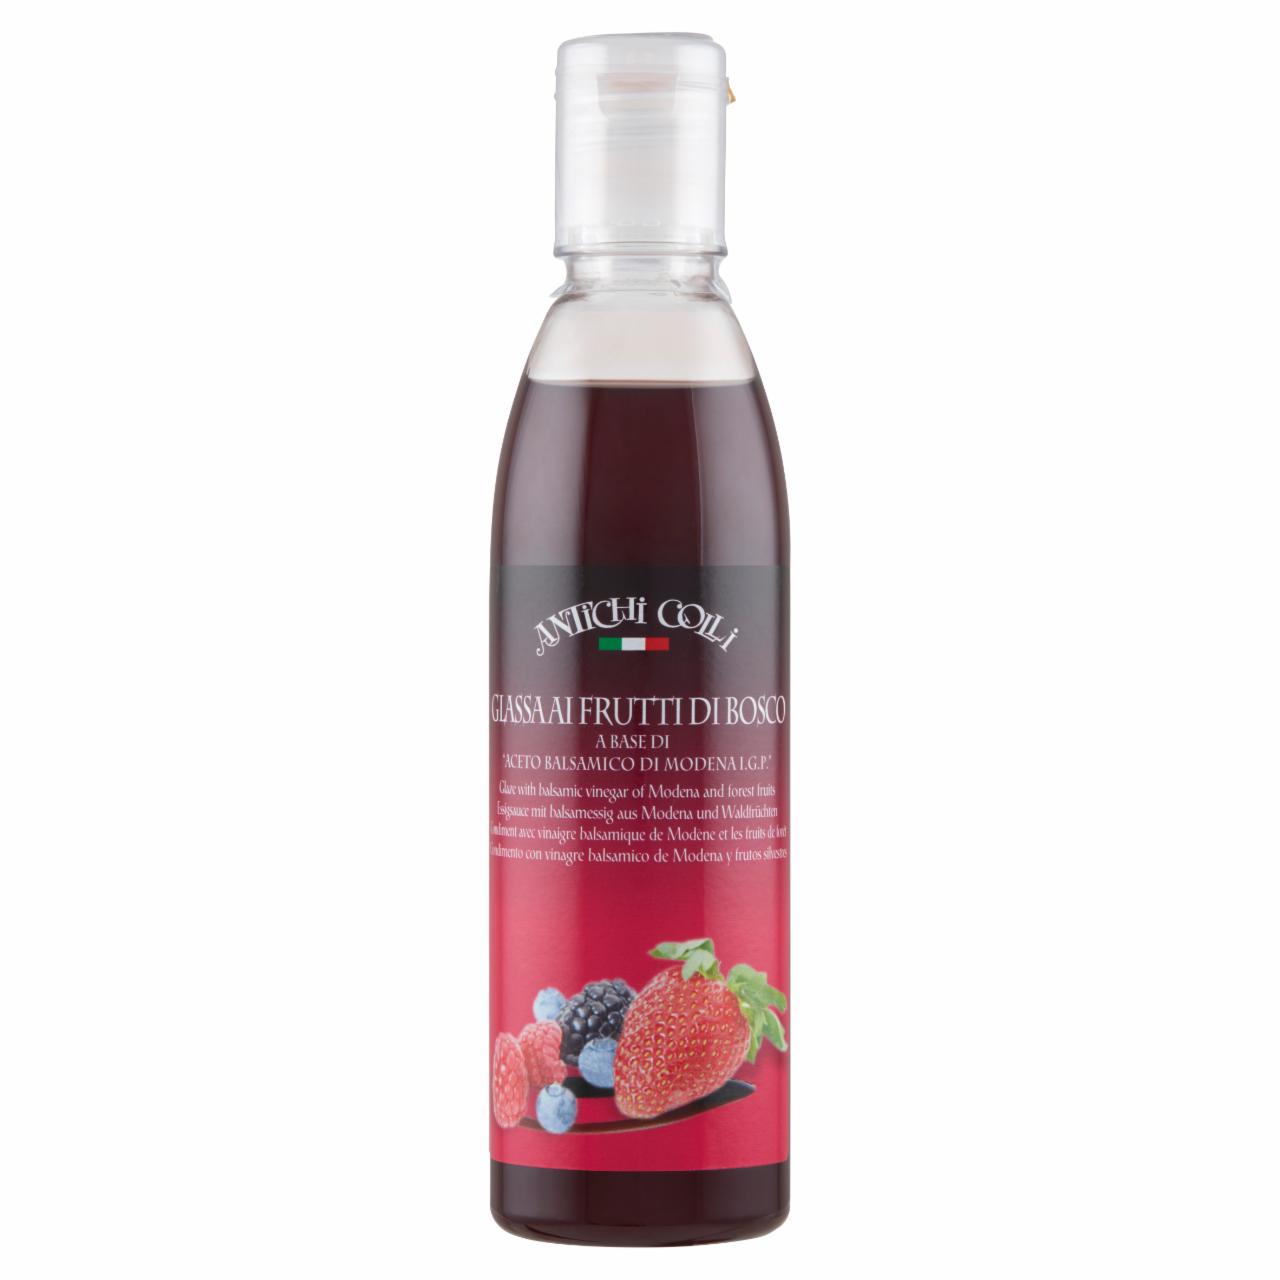 Photo - Antichi Colli Glaze with Balsamic Vinegar of Modena and Forest Fruits 250 ml